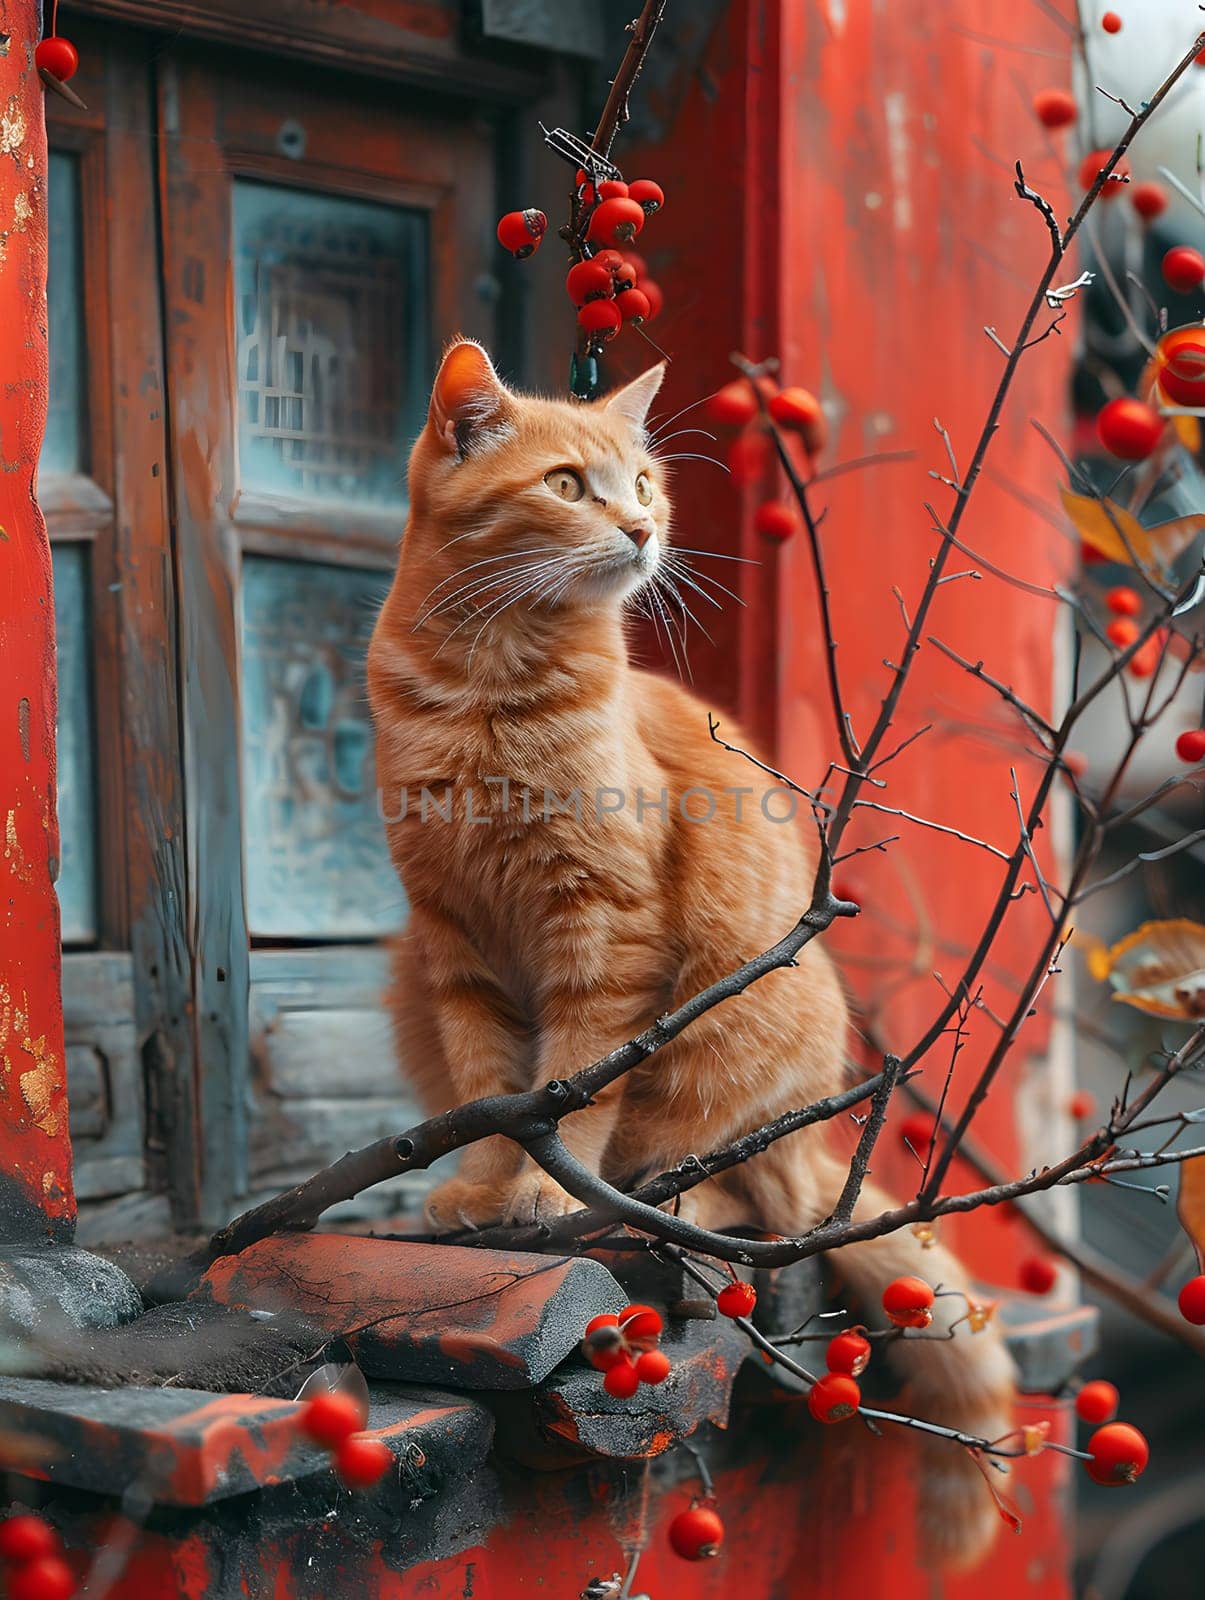 An orange Felidae, a small to mediumsized cat, is perched on a branch with red berries. Its whiskers twitch as it observes the plant outside the window